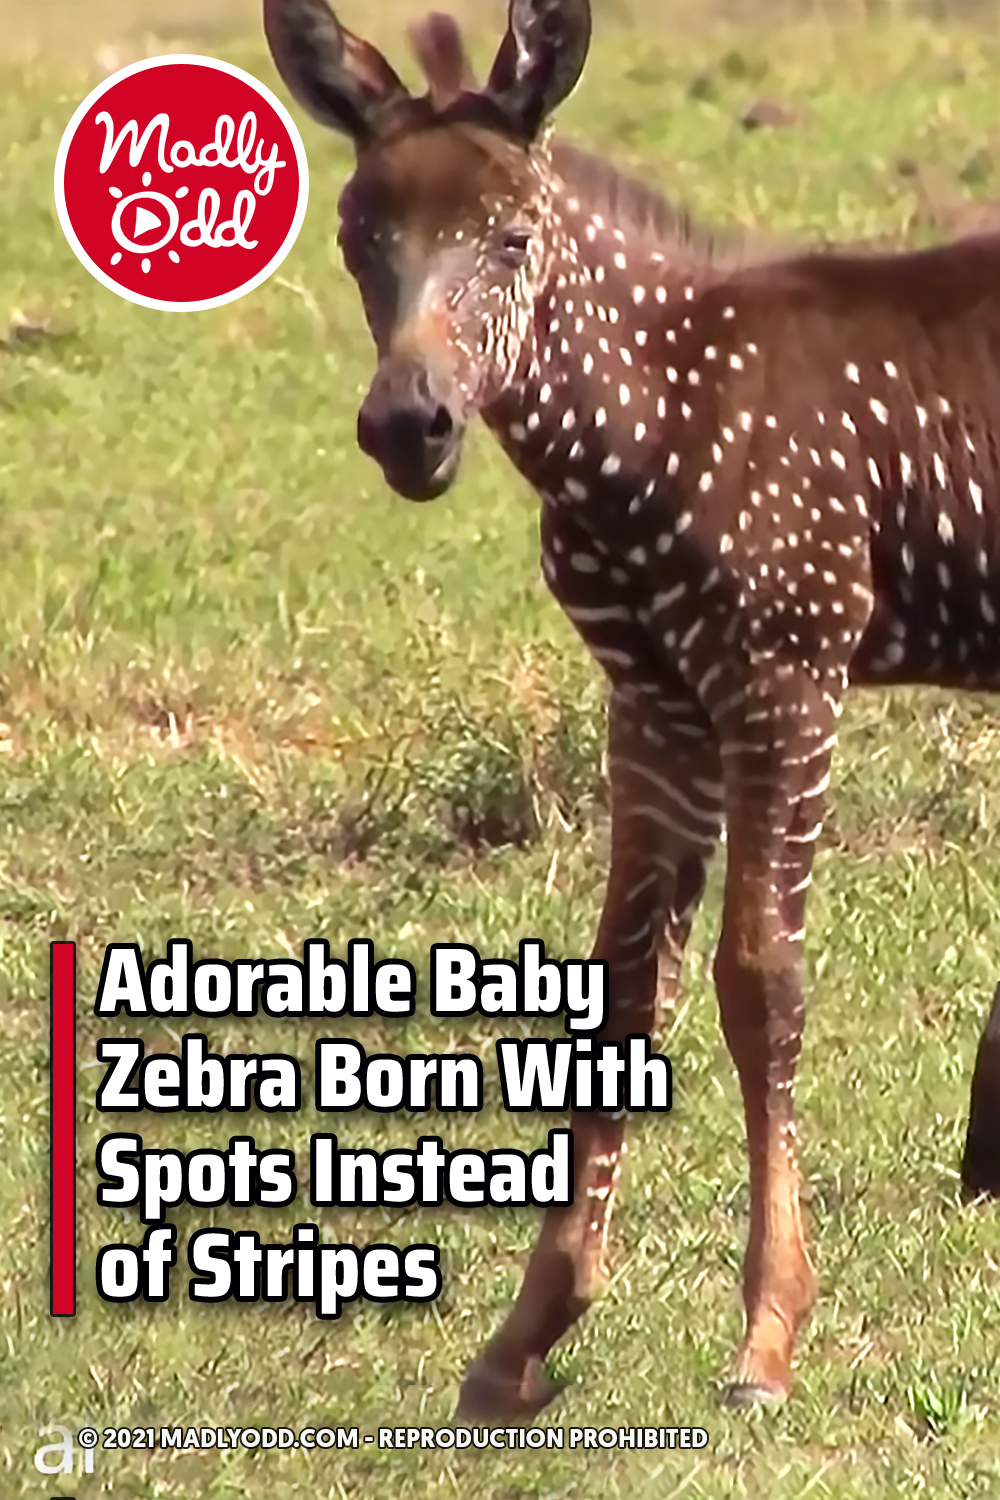 Adorable Baby Zebra Born With Spots Instead of Stripes